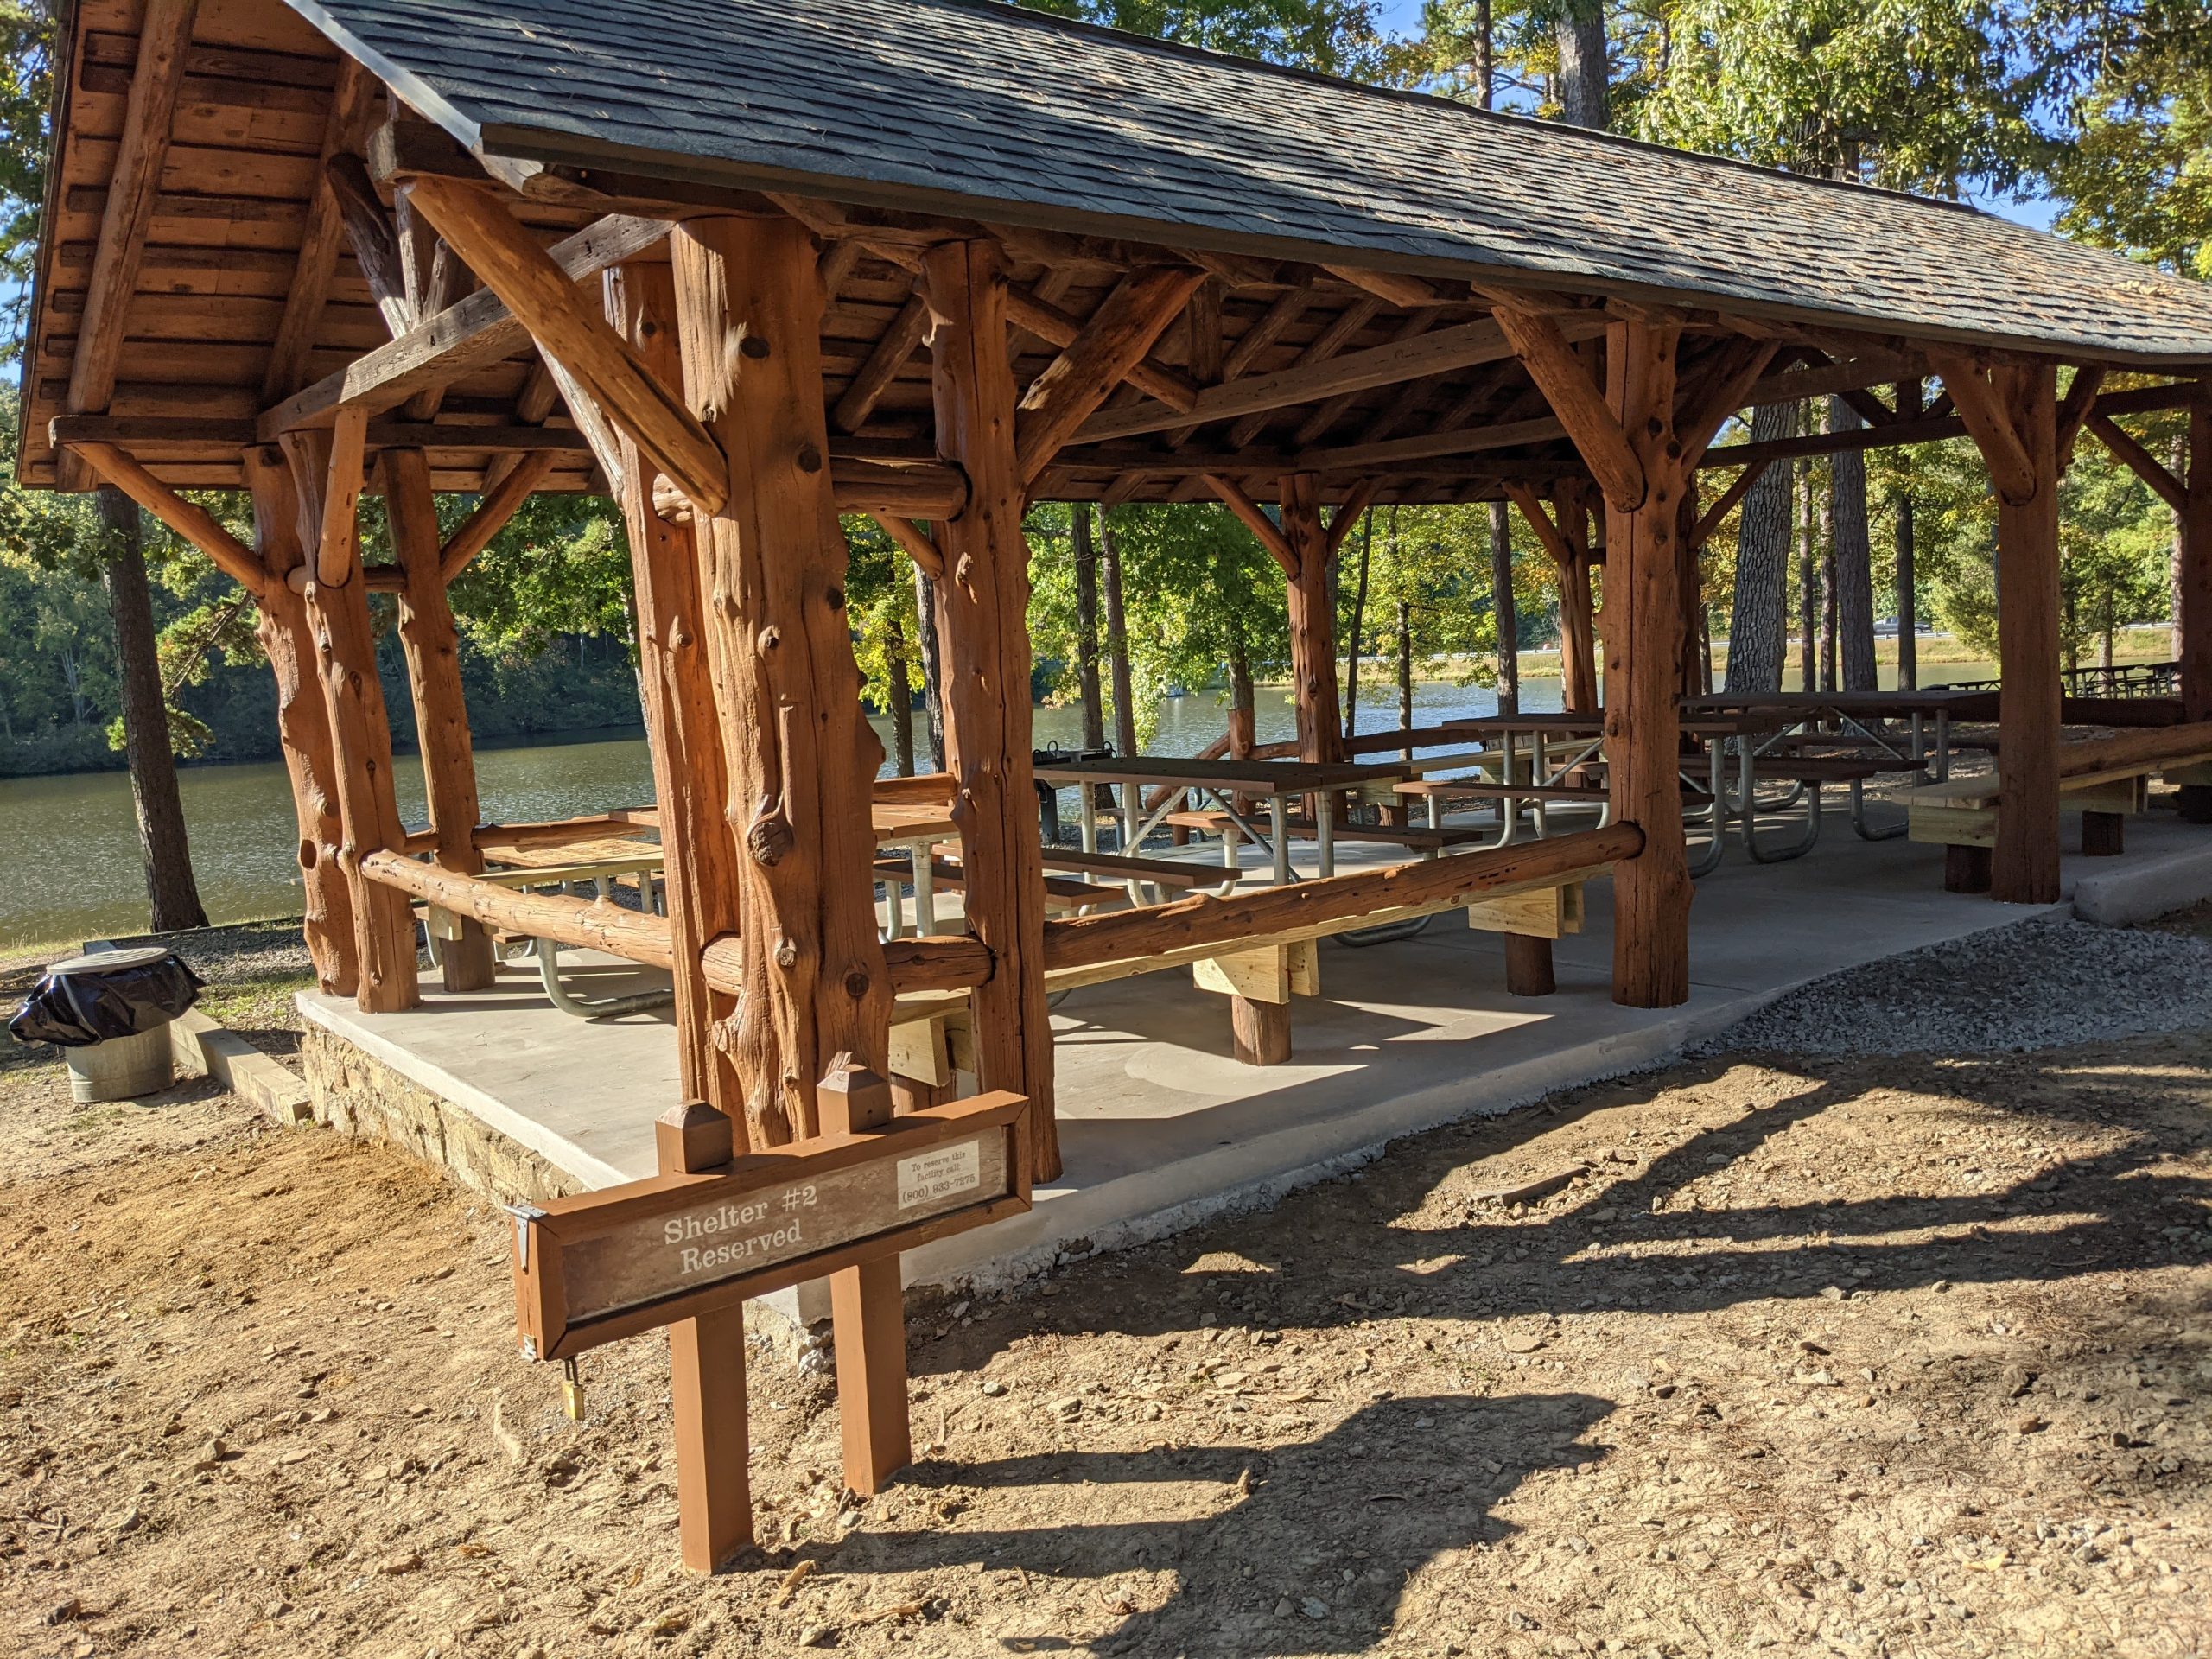 073-0070_Twin_Lakes_State_Park_2021_picnic_shelter_VLR_Online-scaled